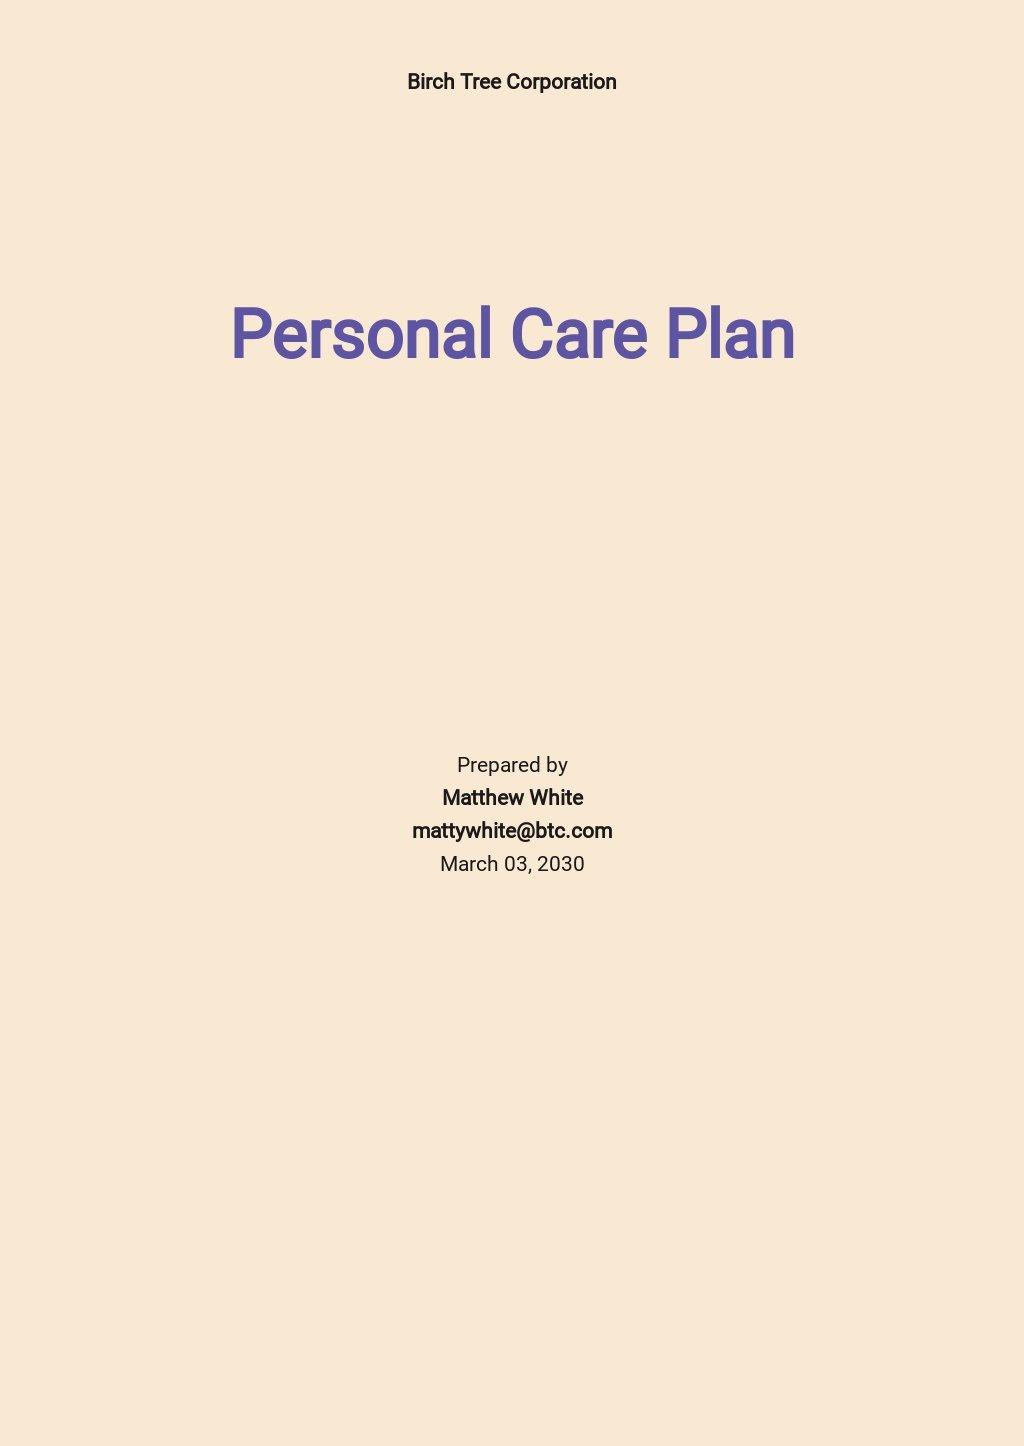 Personal Care Plan Template.jpe